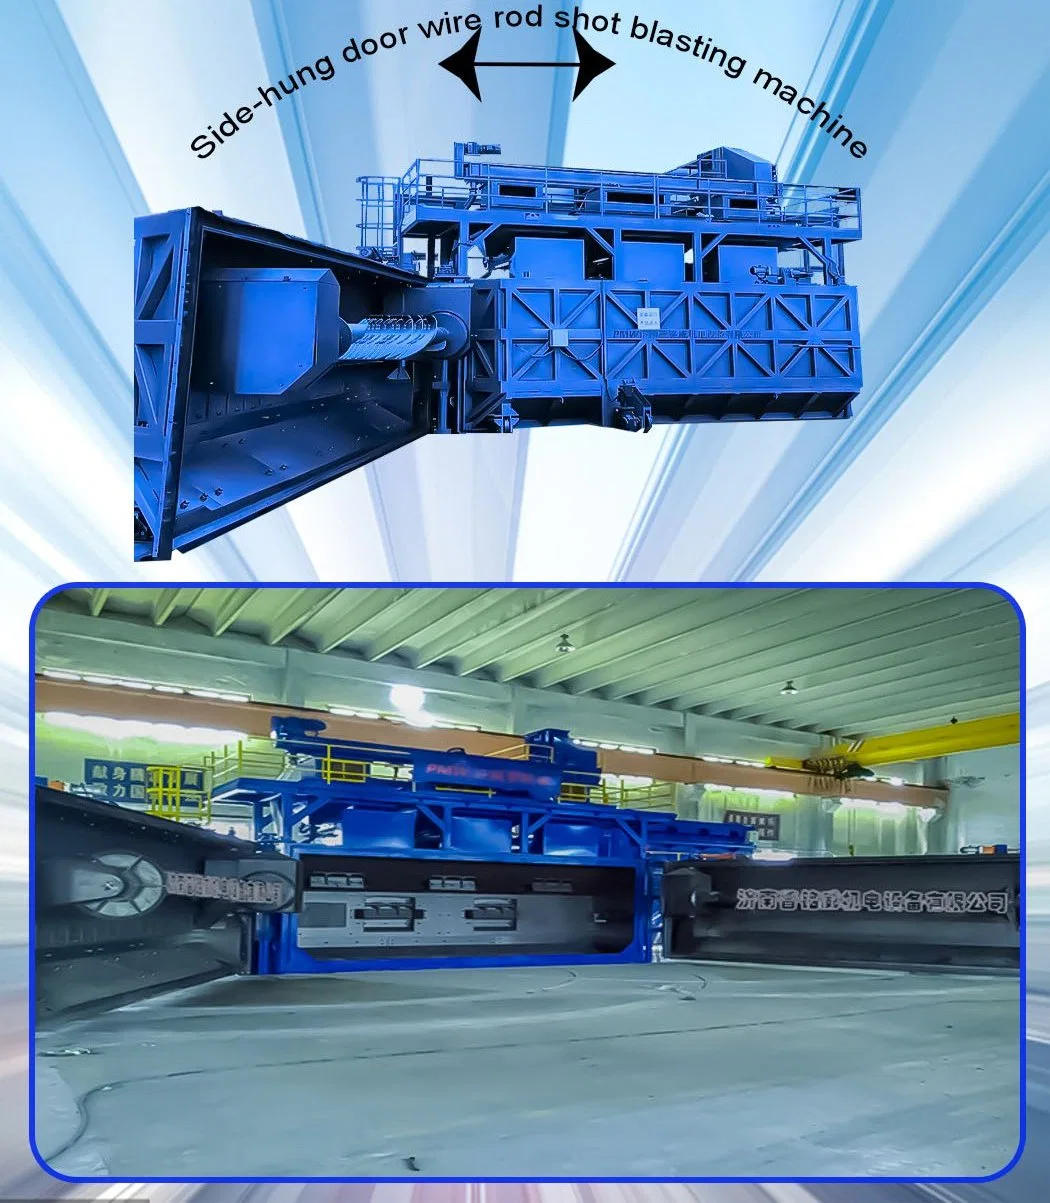 Wire Rod Coil Shot Blasting Machine with Wire Ranging From 5.5-42 mm